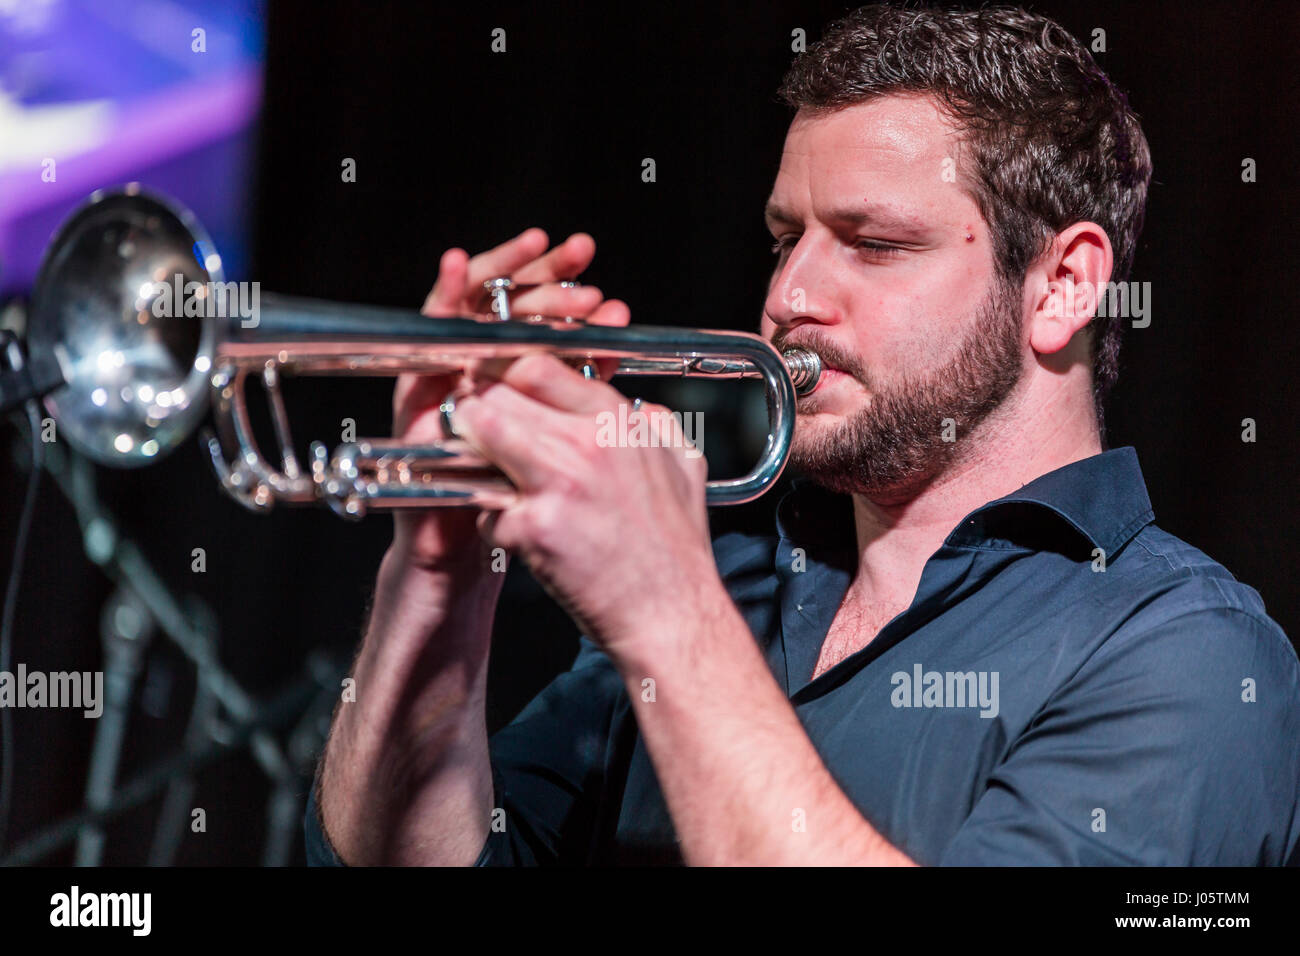 Frankfurt/Main, Germany. 5th April, 2017. Yamaha All-Stars Band performs at exhibition area of Yamaha Music Europe GmbH. The Band is a collaboration of popular german Jazz and Pop musicians. Here: Christoph Moschberger, trumpet. Fotocredit: Christian Lademann Stock Photo